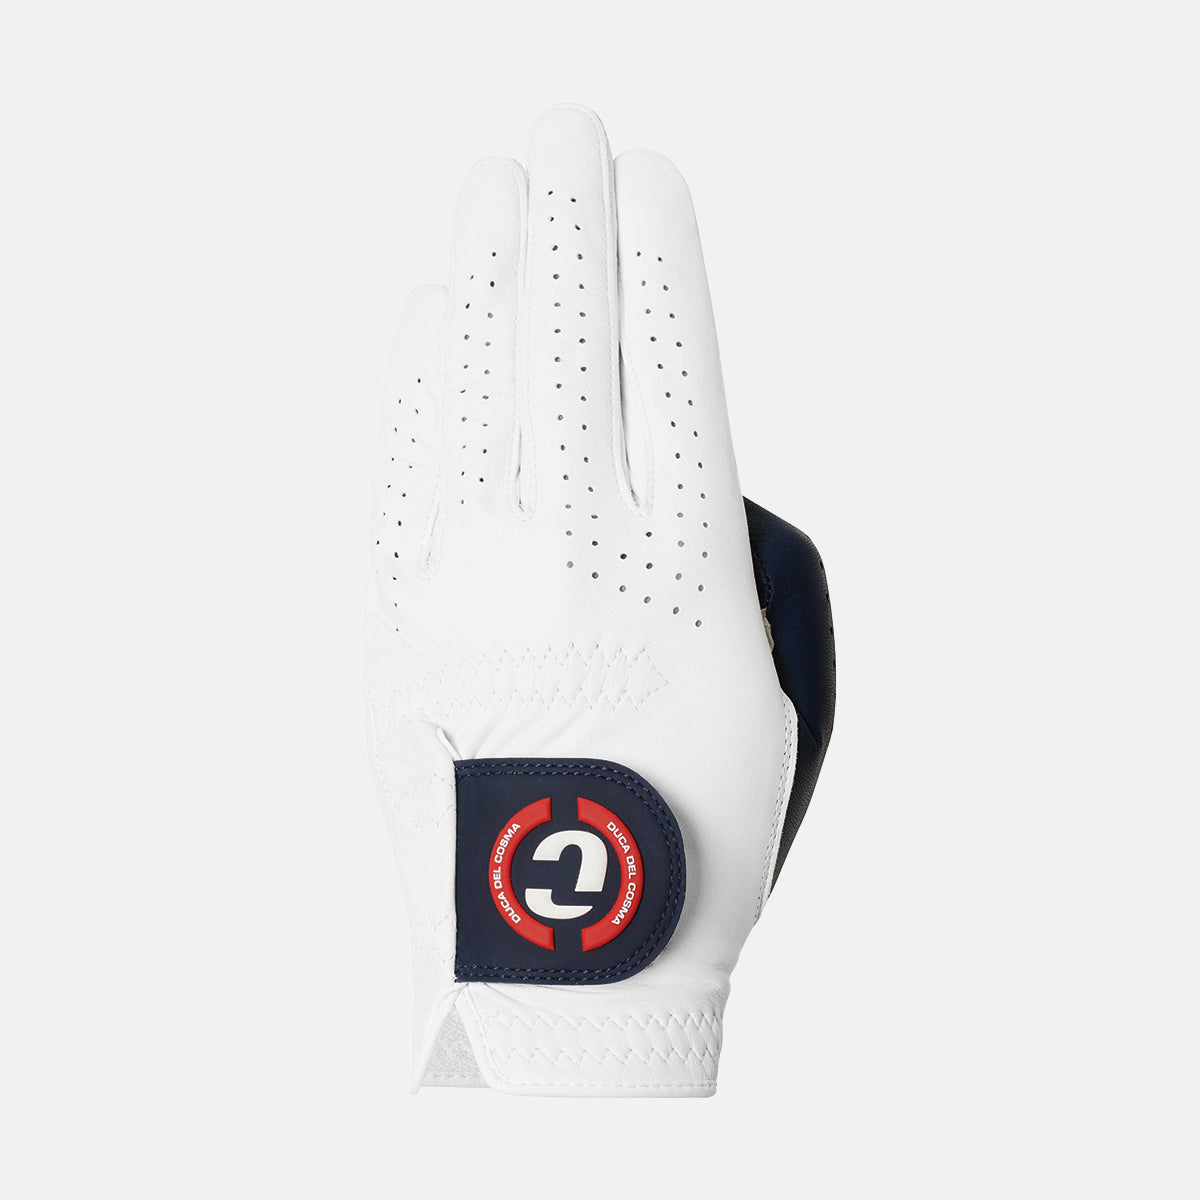 Elite pro sentosa left-handed white men's golf glove for tour-level player's with quick drying technology